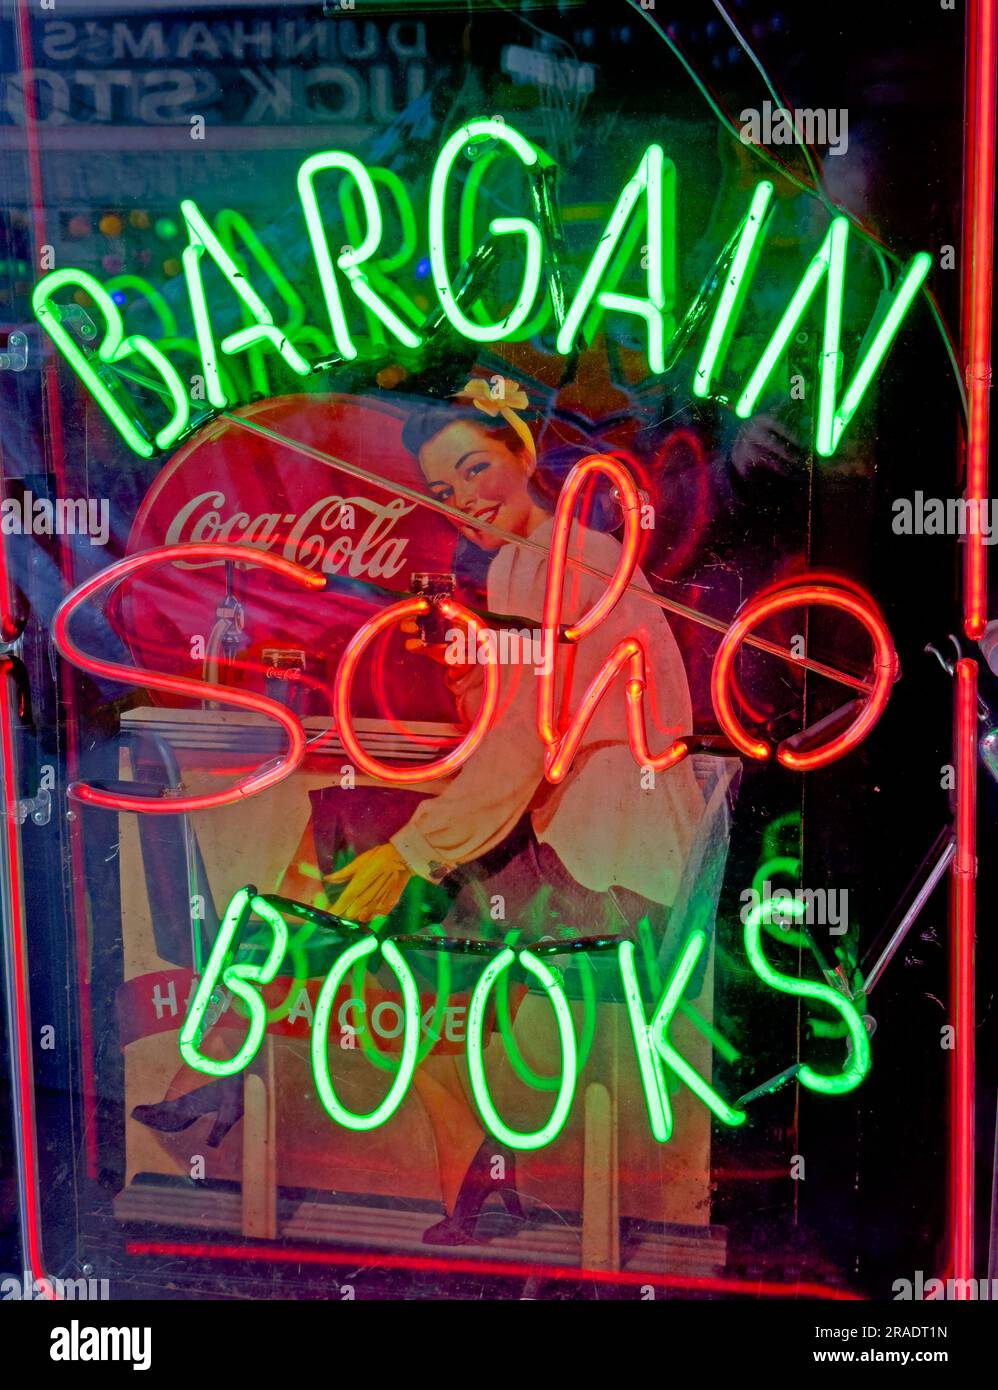 Soho red neon invites into erotic book and magazine shops, sex aid stores, in London's West End entertainment district Stock Photo